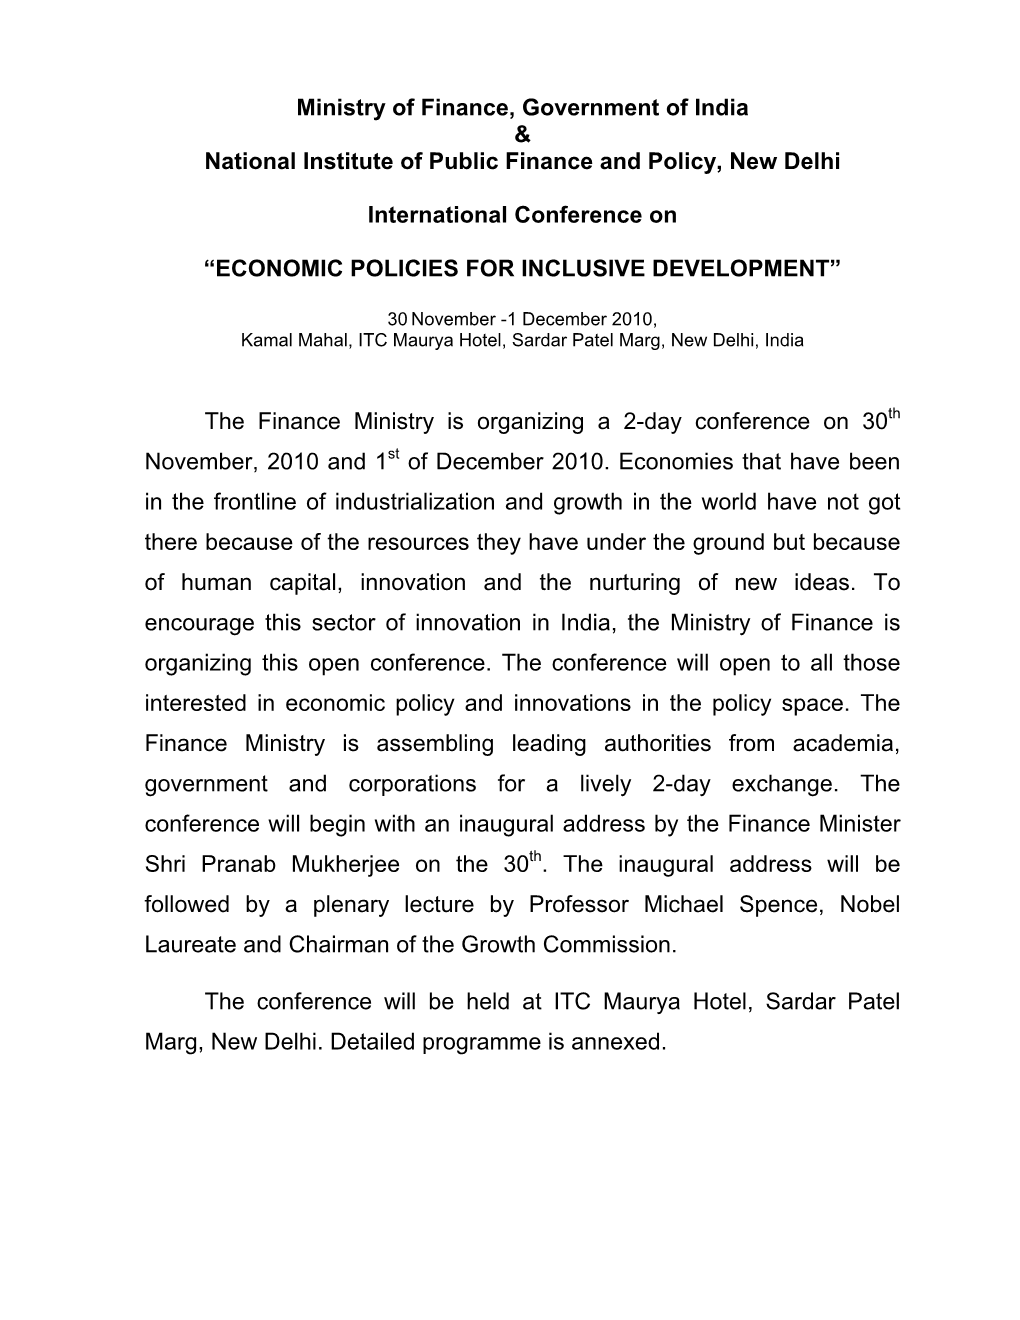 Ministry of Finance, Government of India & National Institute of Public